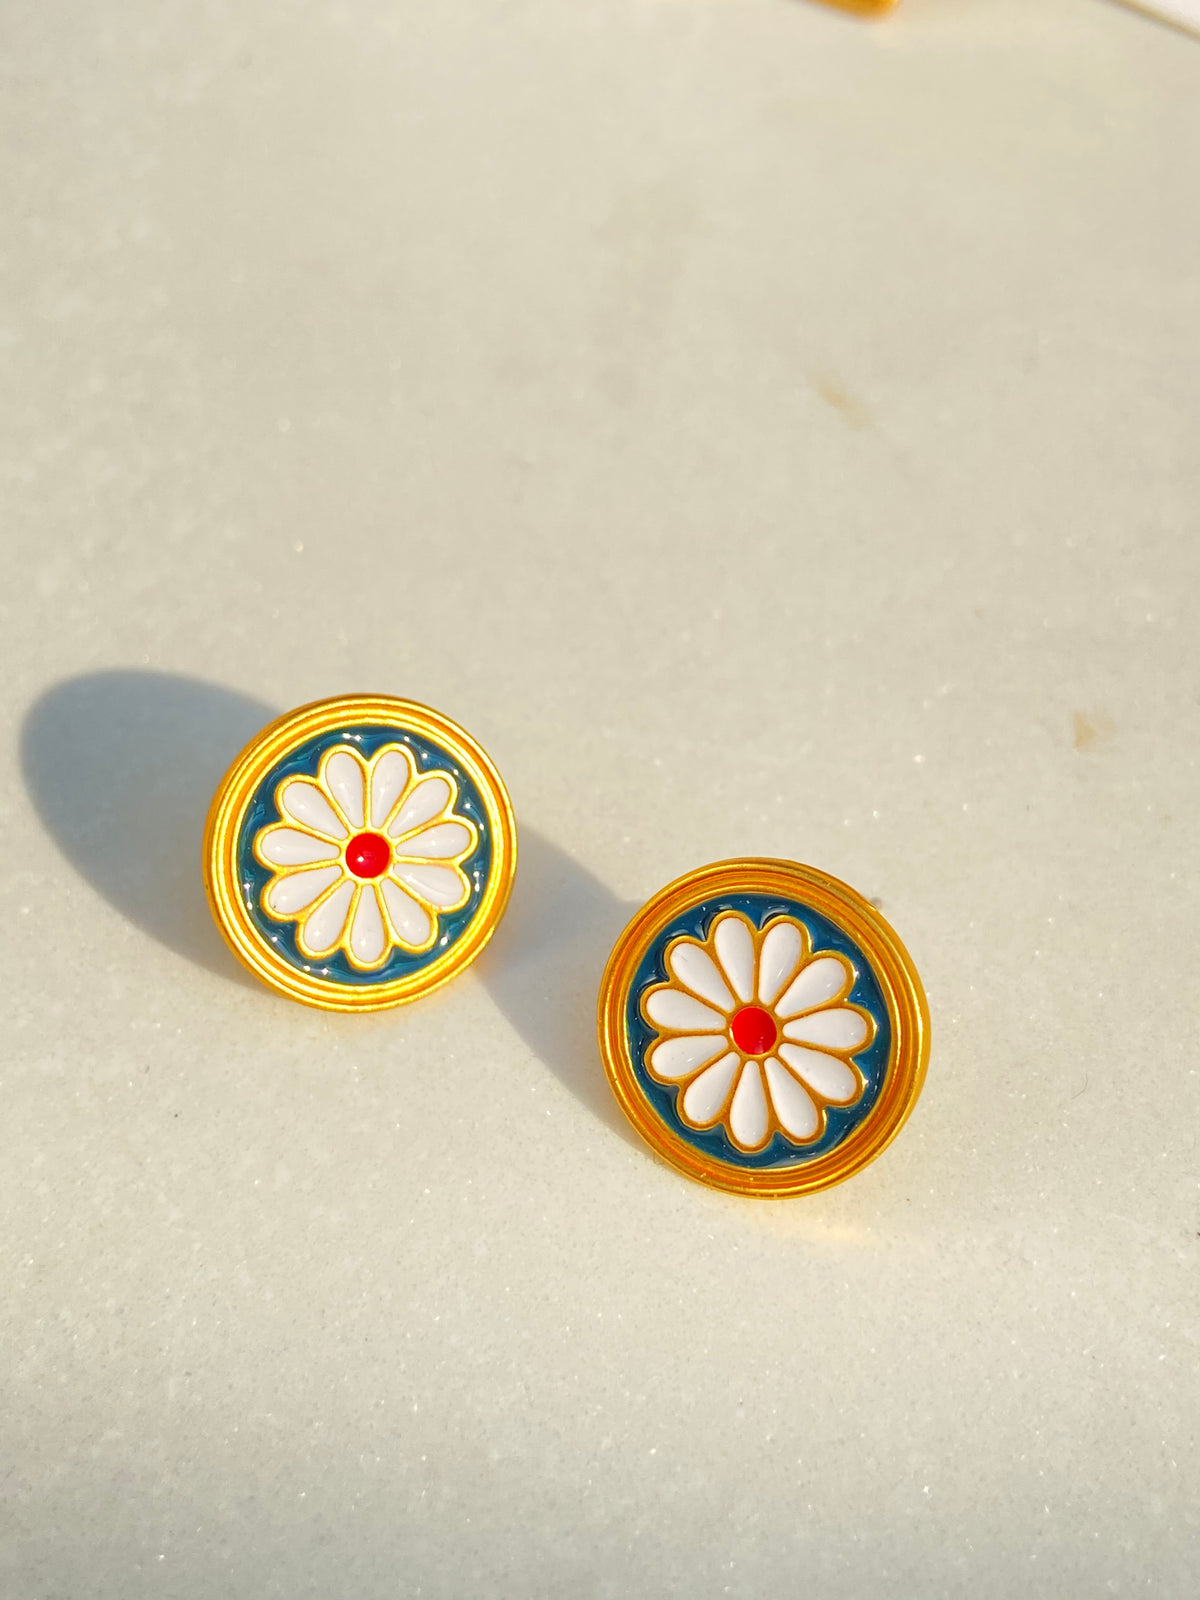 Vintage Round Daisy Earrings